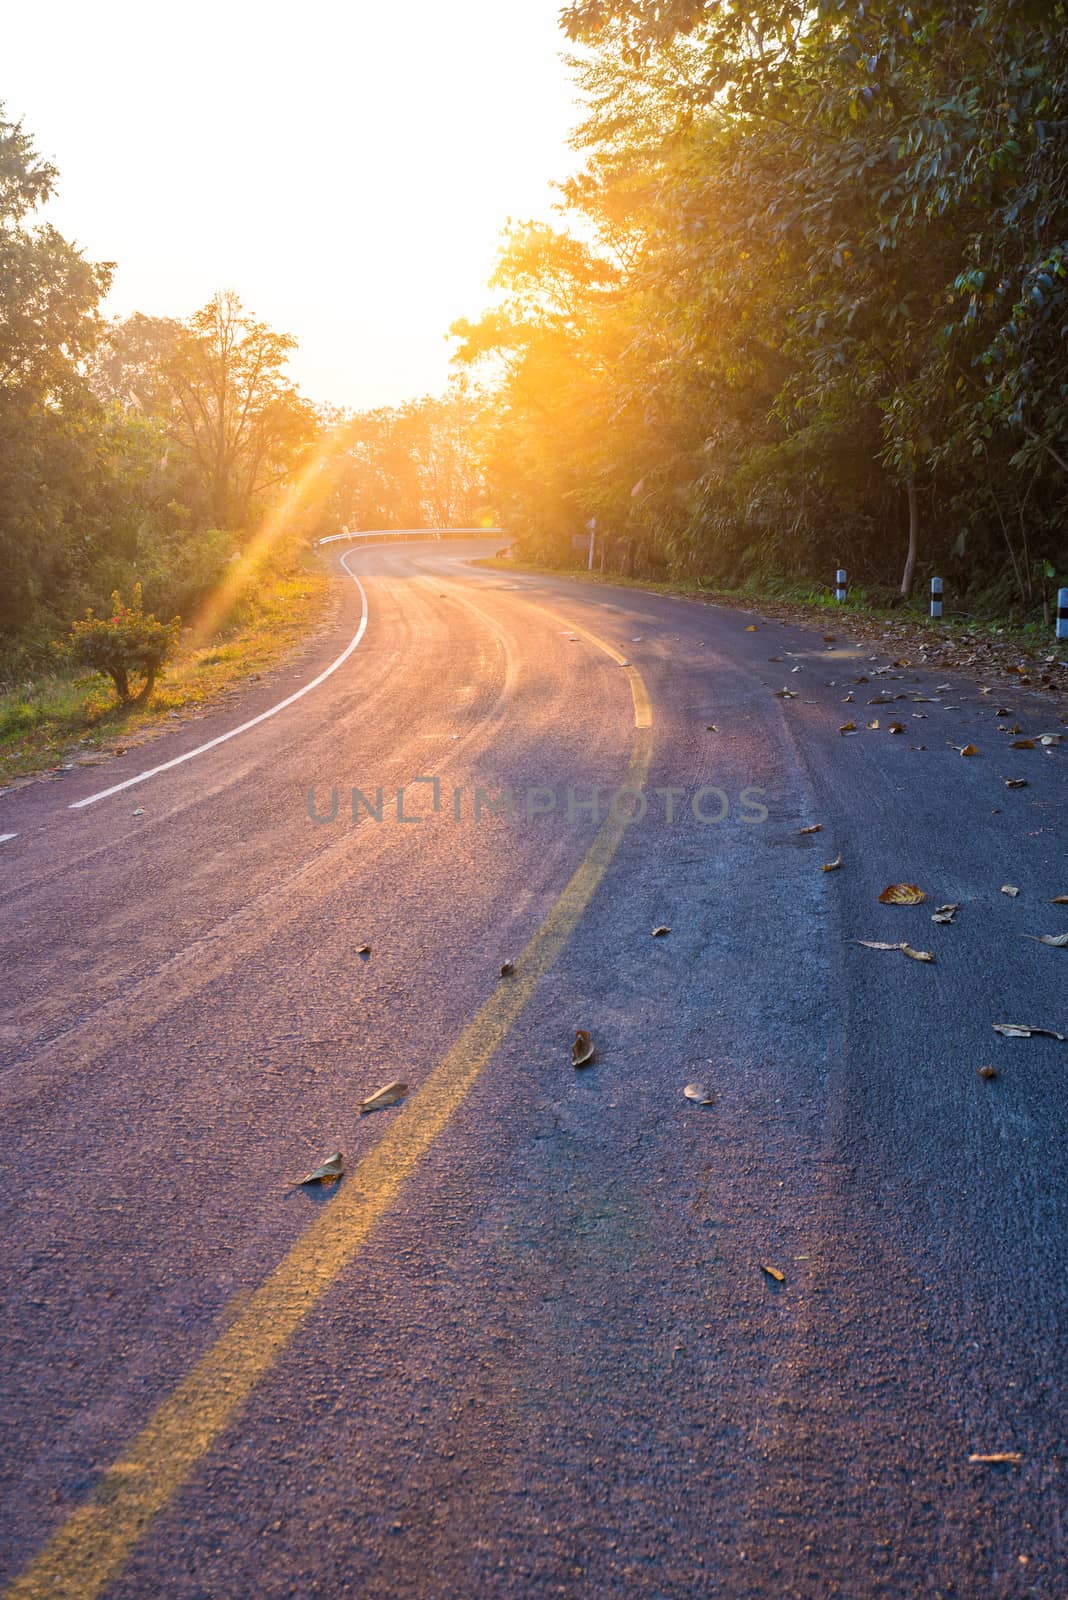 road in the mountain with yellow line and sunrise flare effect